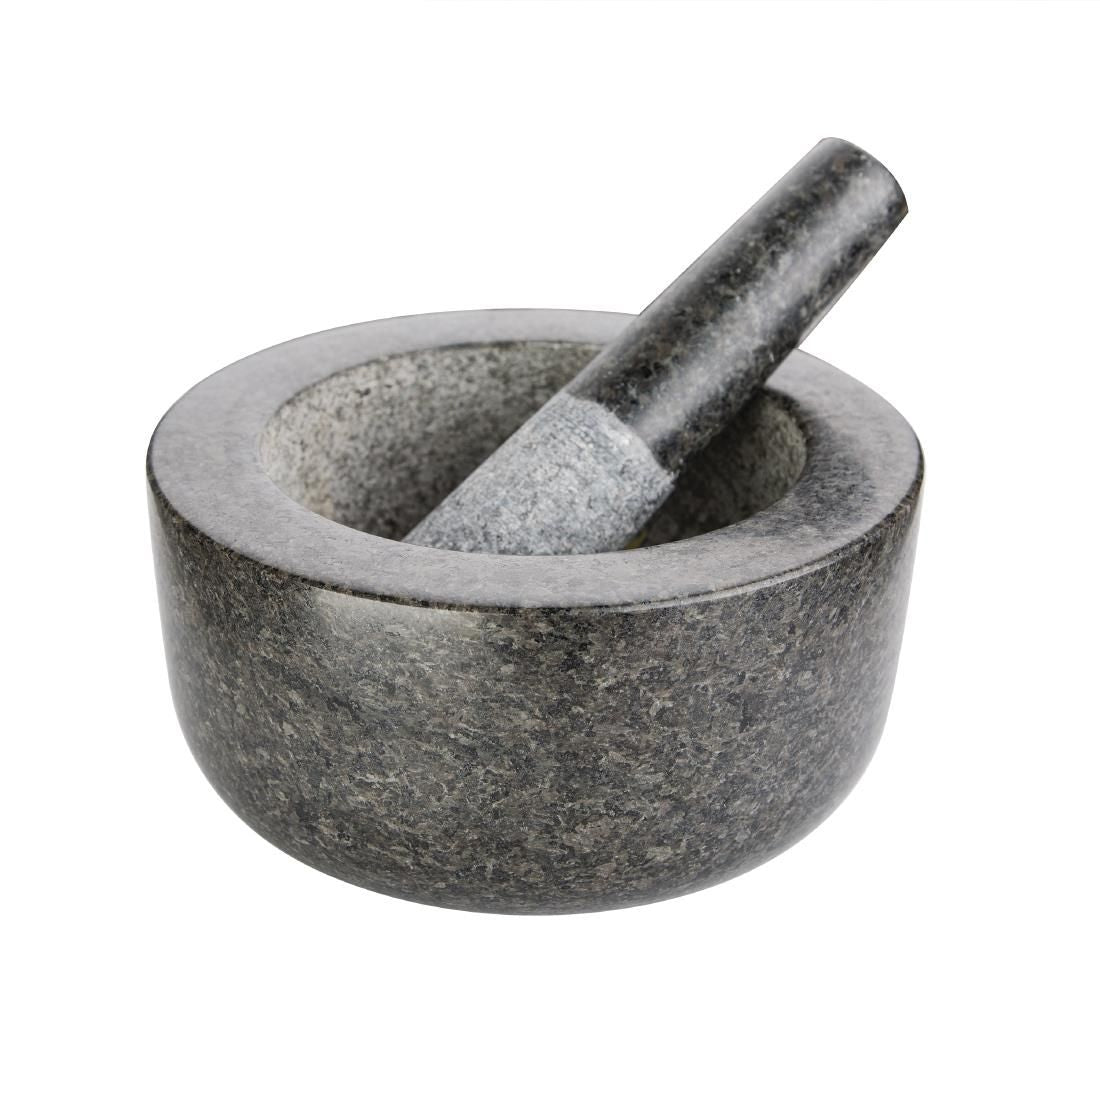 GG016 Vogue Pestle and Mortar JD Catering Equipment Solutions Ltd